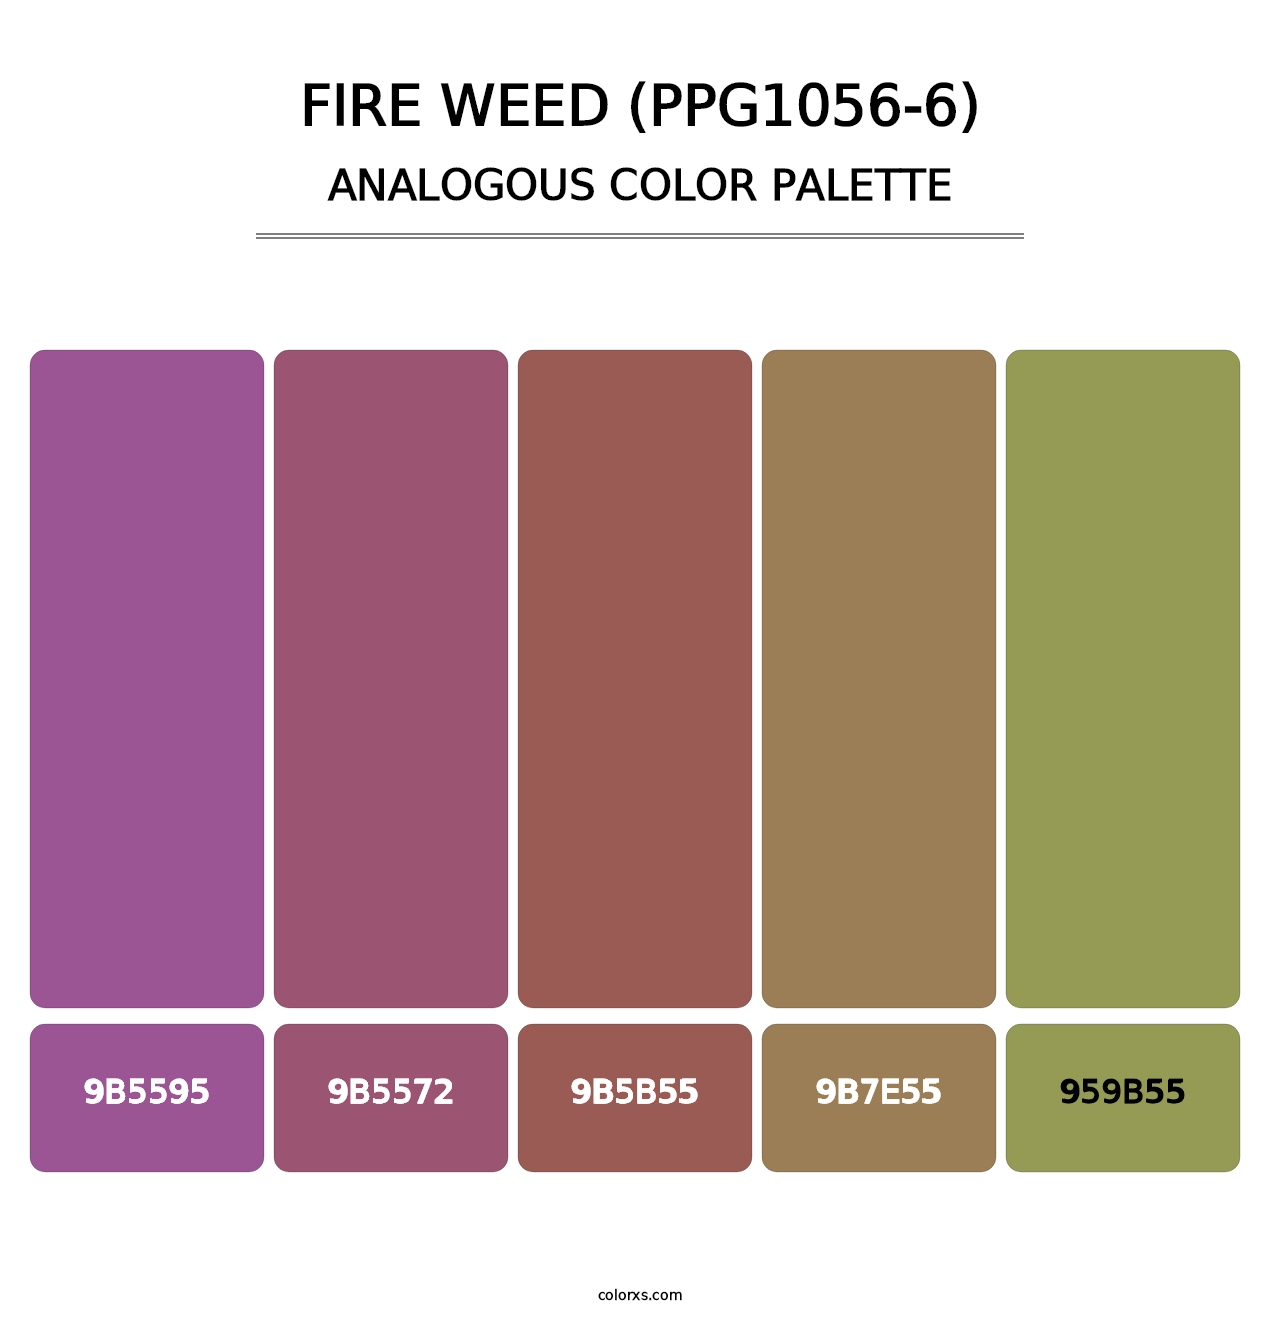 Fire Weed (PPG1056-6) - Analogous Color Palette